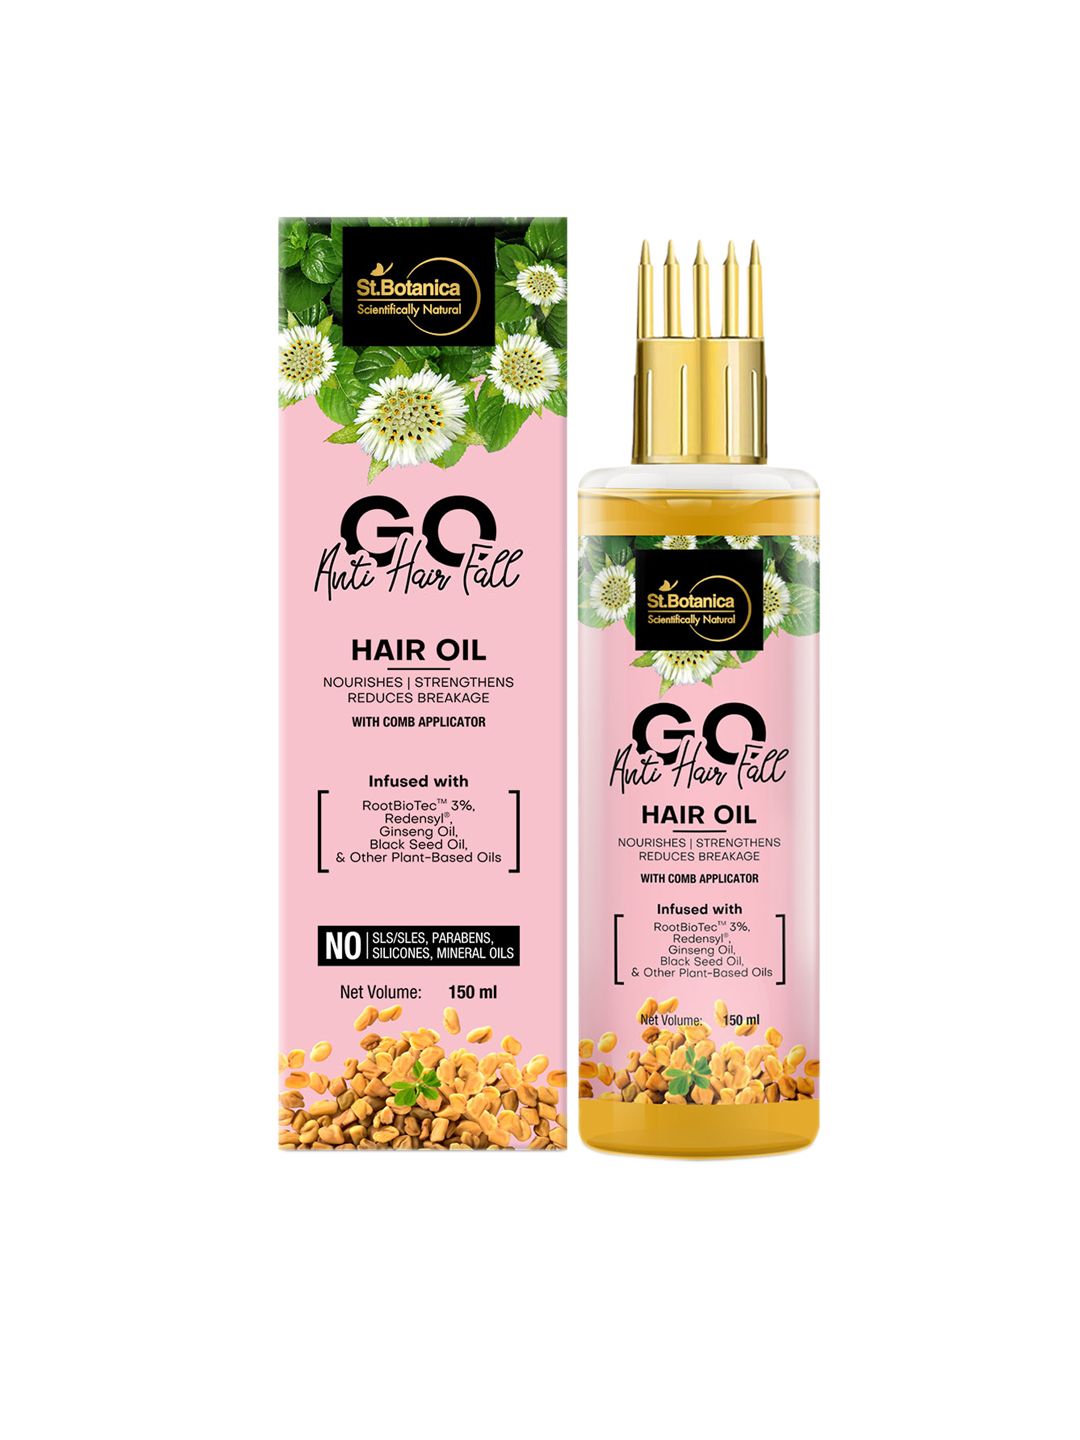 St.Botanica Unisex GO Anti Hair Fall Hair Oil with Comb Applicator 150 ml Price in India